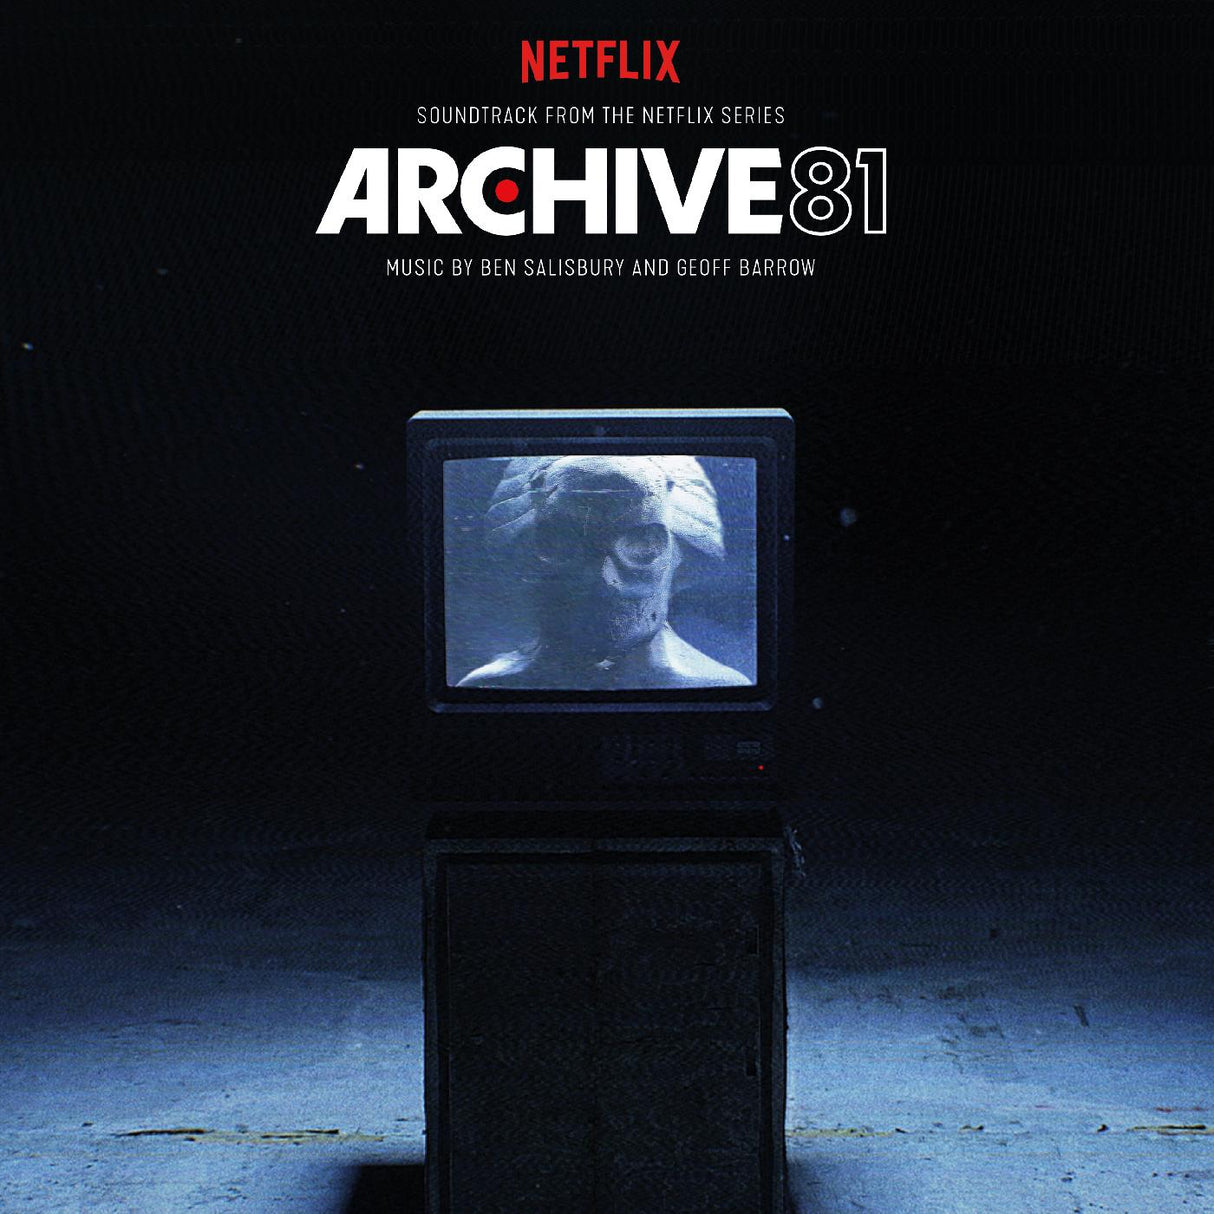 Archive 81 (Soundtrack From The Netflix Series) [Vinyl]